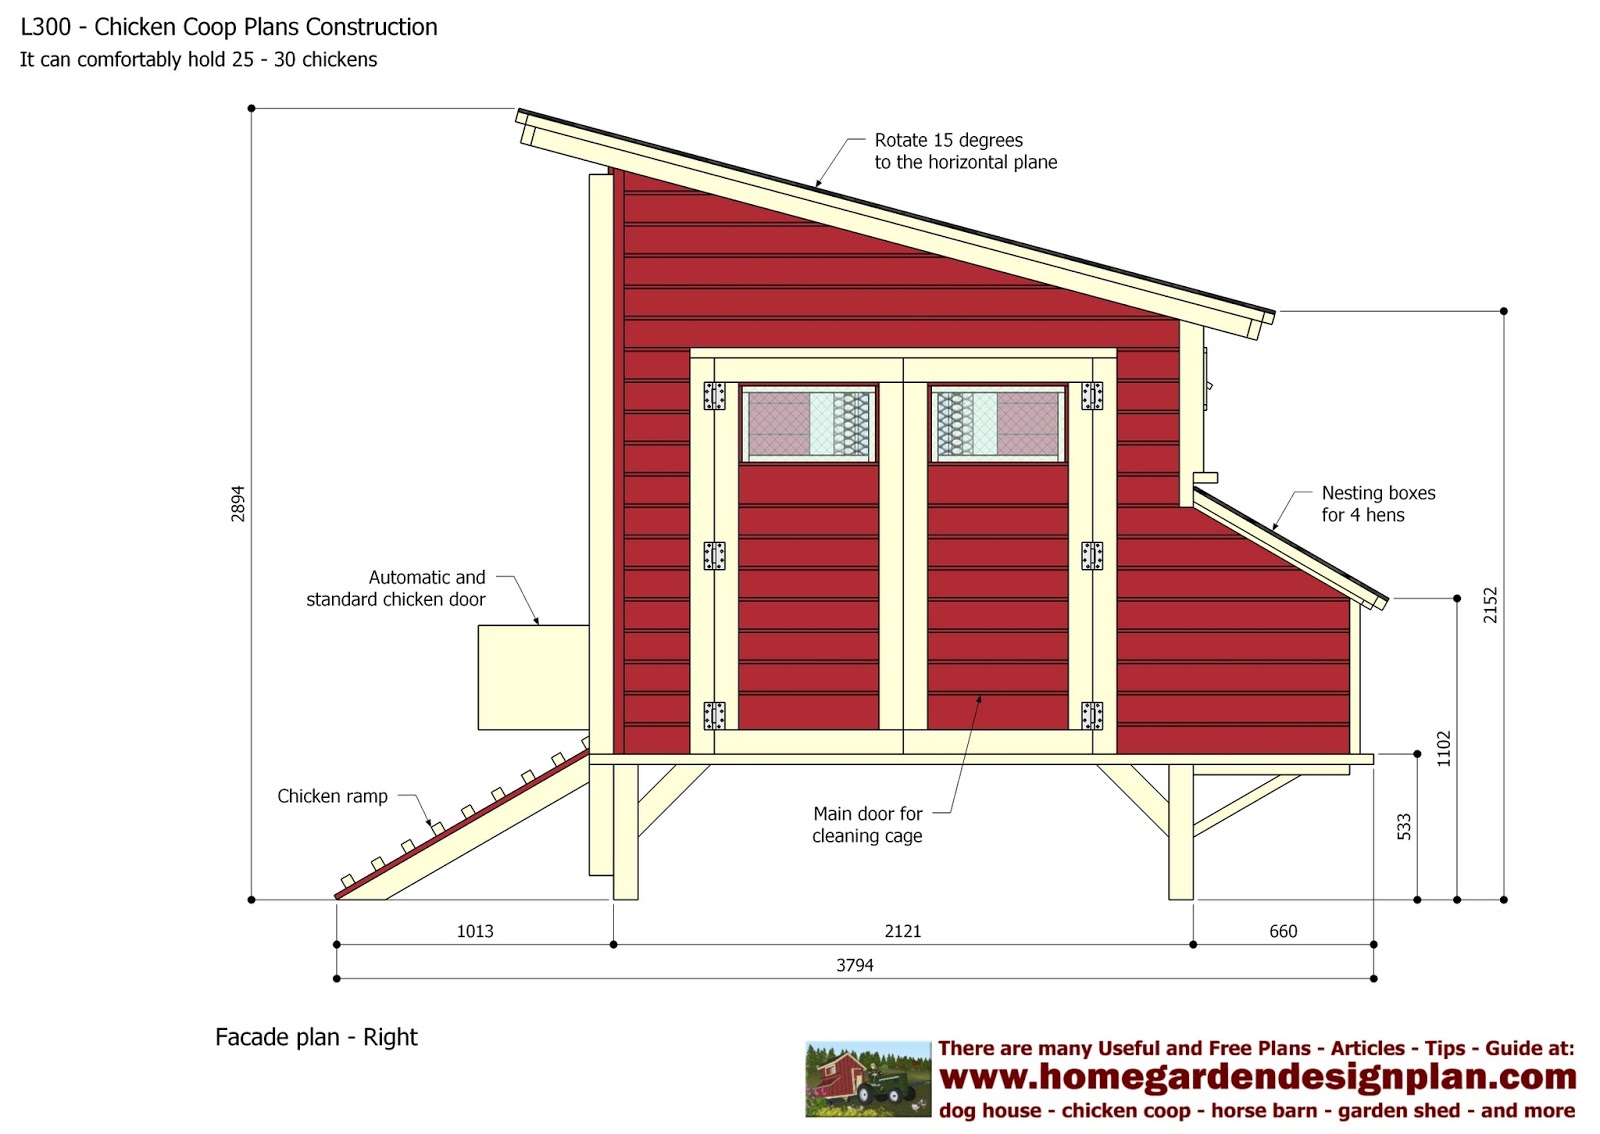 Learn Build Chicken Coop: How To Build A Chicken Coop Roof - 0.3.2+ +L300+ +Chicken+Coop+Plans+Construction+ +Chicken+Coop+Design+ +How+To+BuilD+A+Chicken+Coop